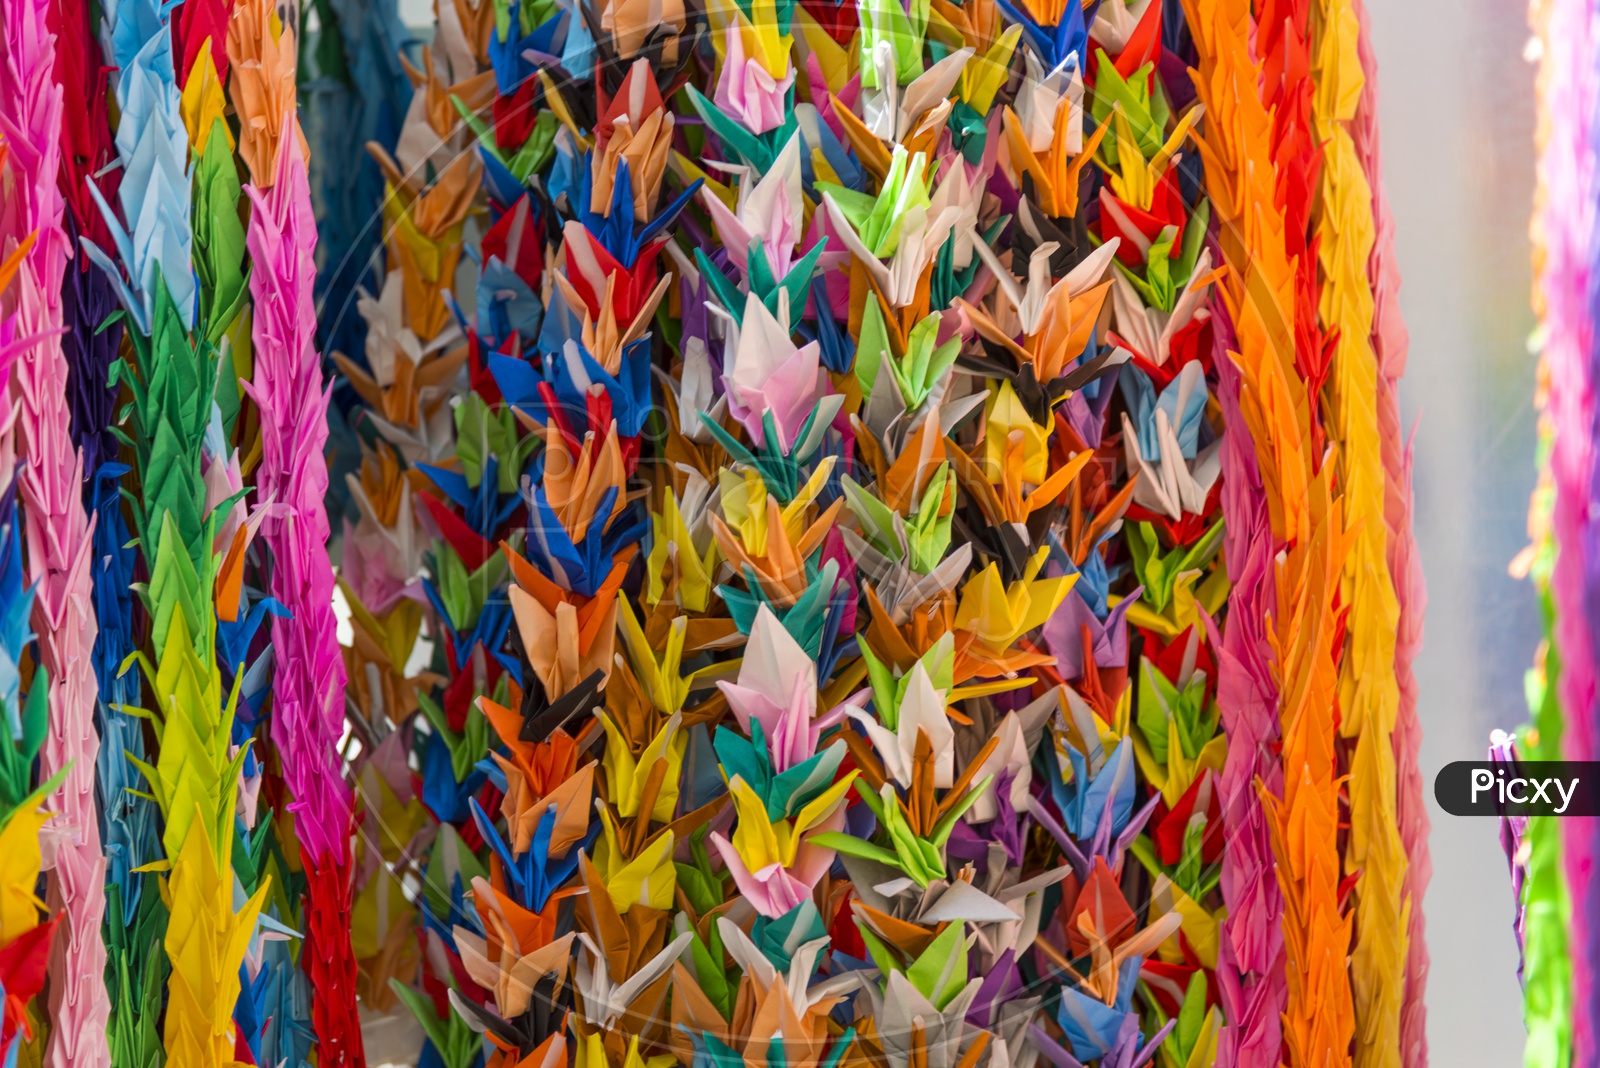 Colourful Decorative Papers In Vendor Stall